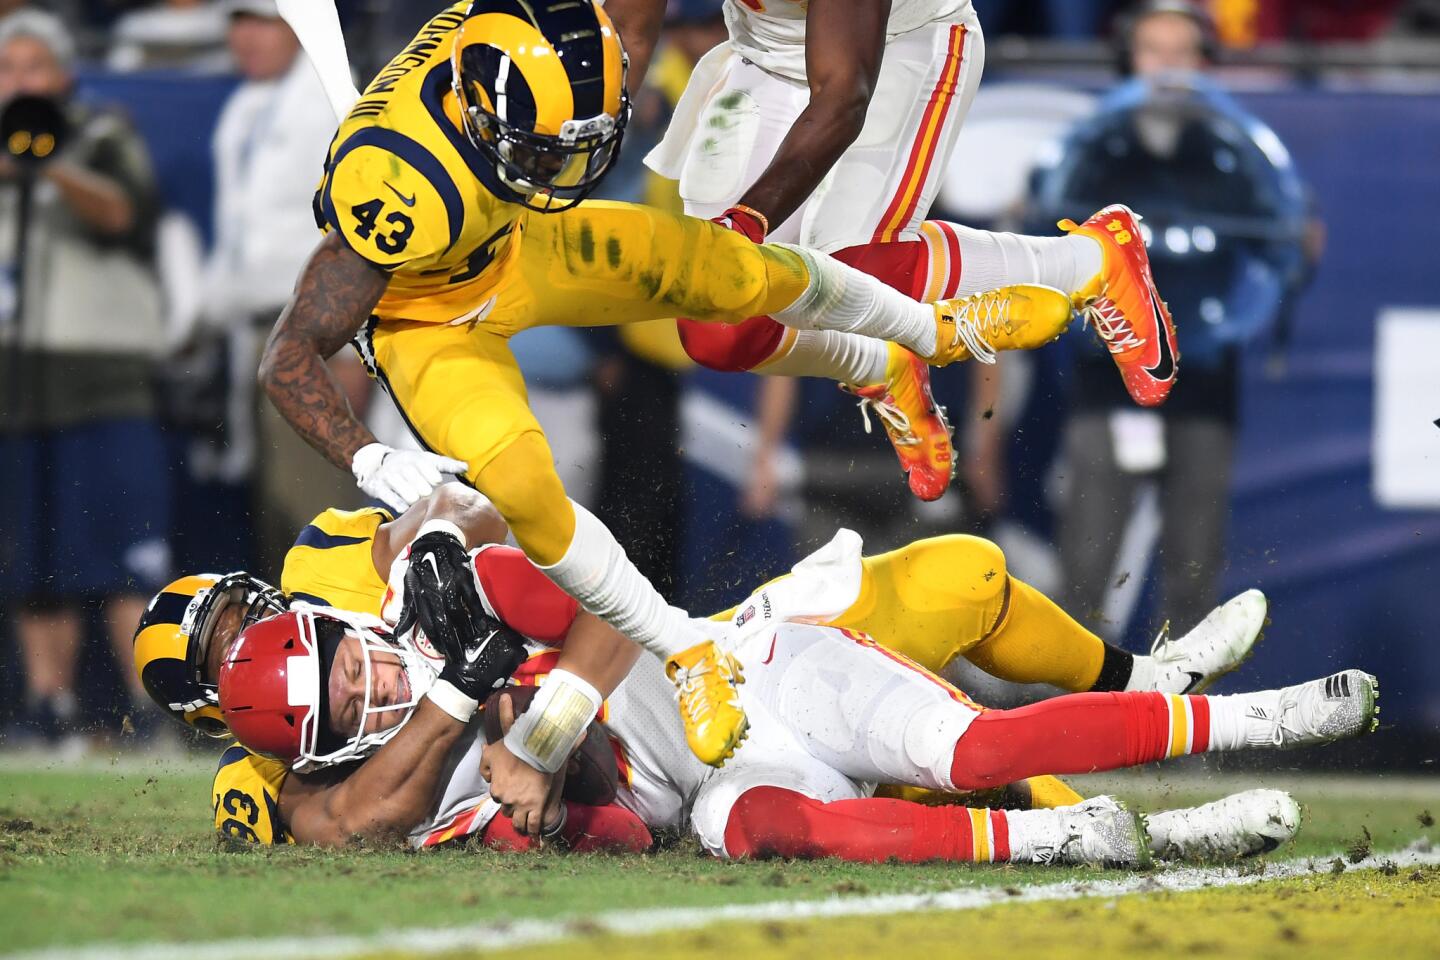 Rams outduel Chiefs 54-51 in offensive extravaganza, Raiders/NFL